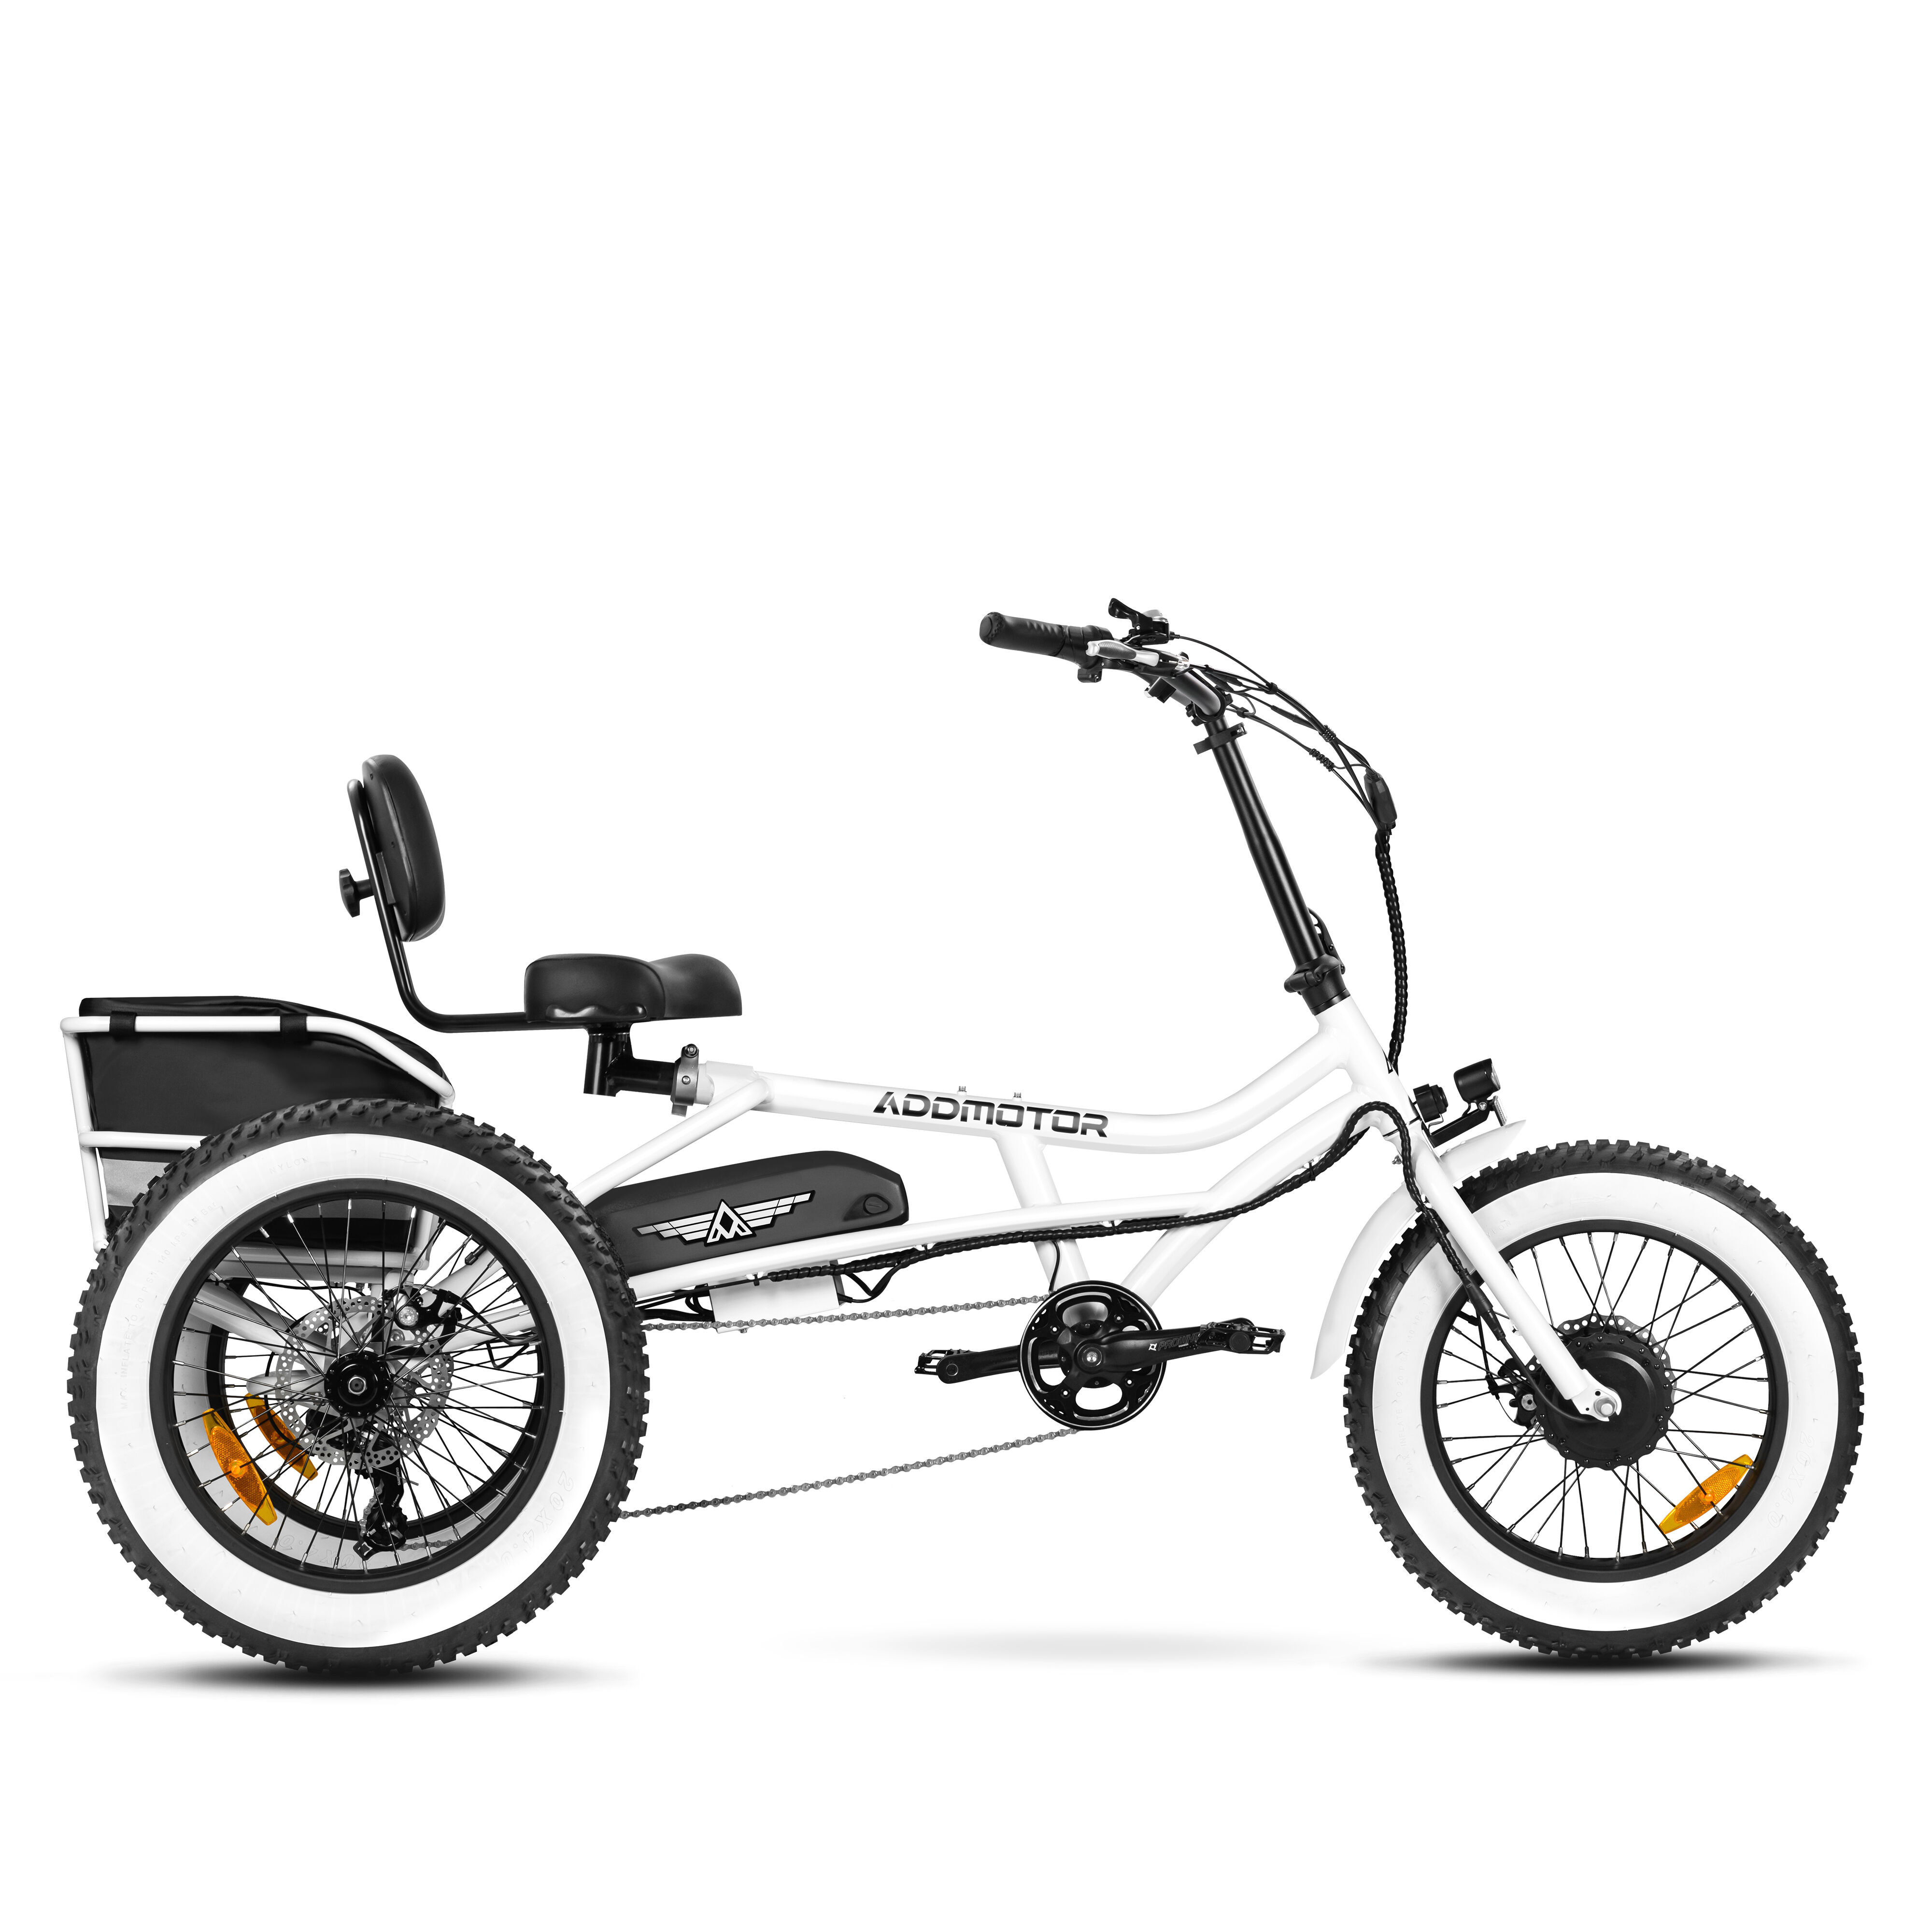 Addmotor M-360 3 Wheel Electric Bikes for Adult, Fat Tire and Long Range, Pearl White 2023 New Version